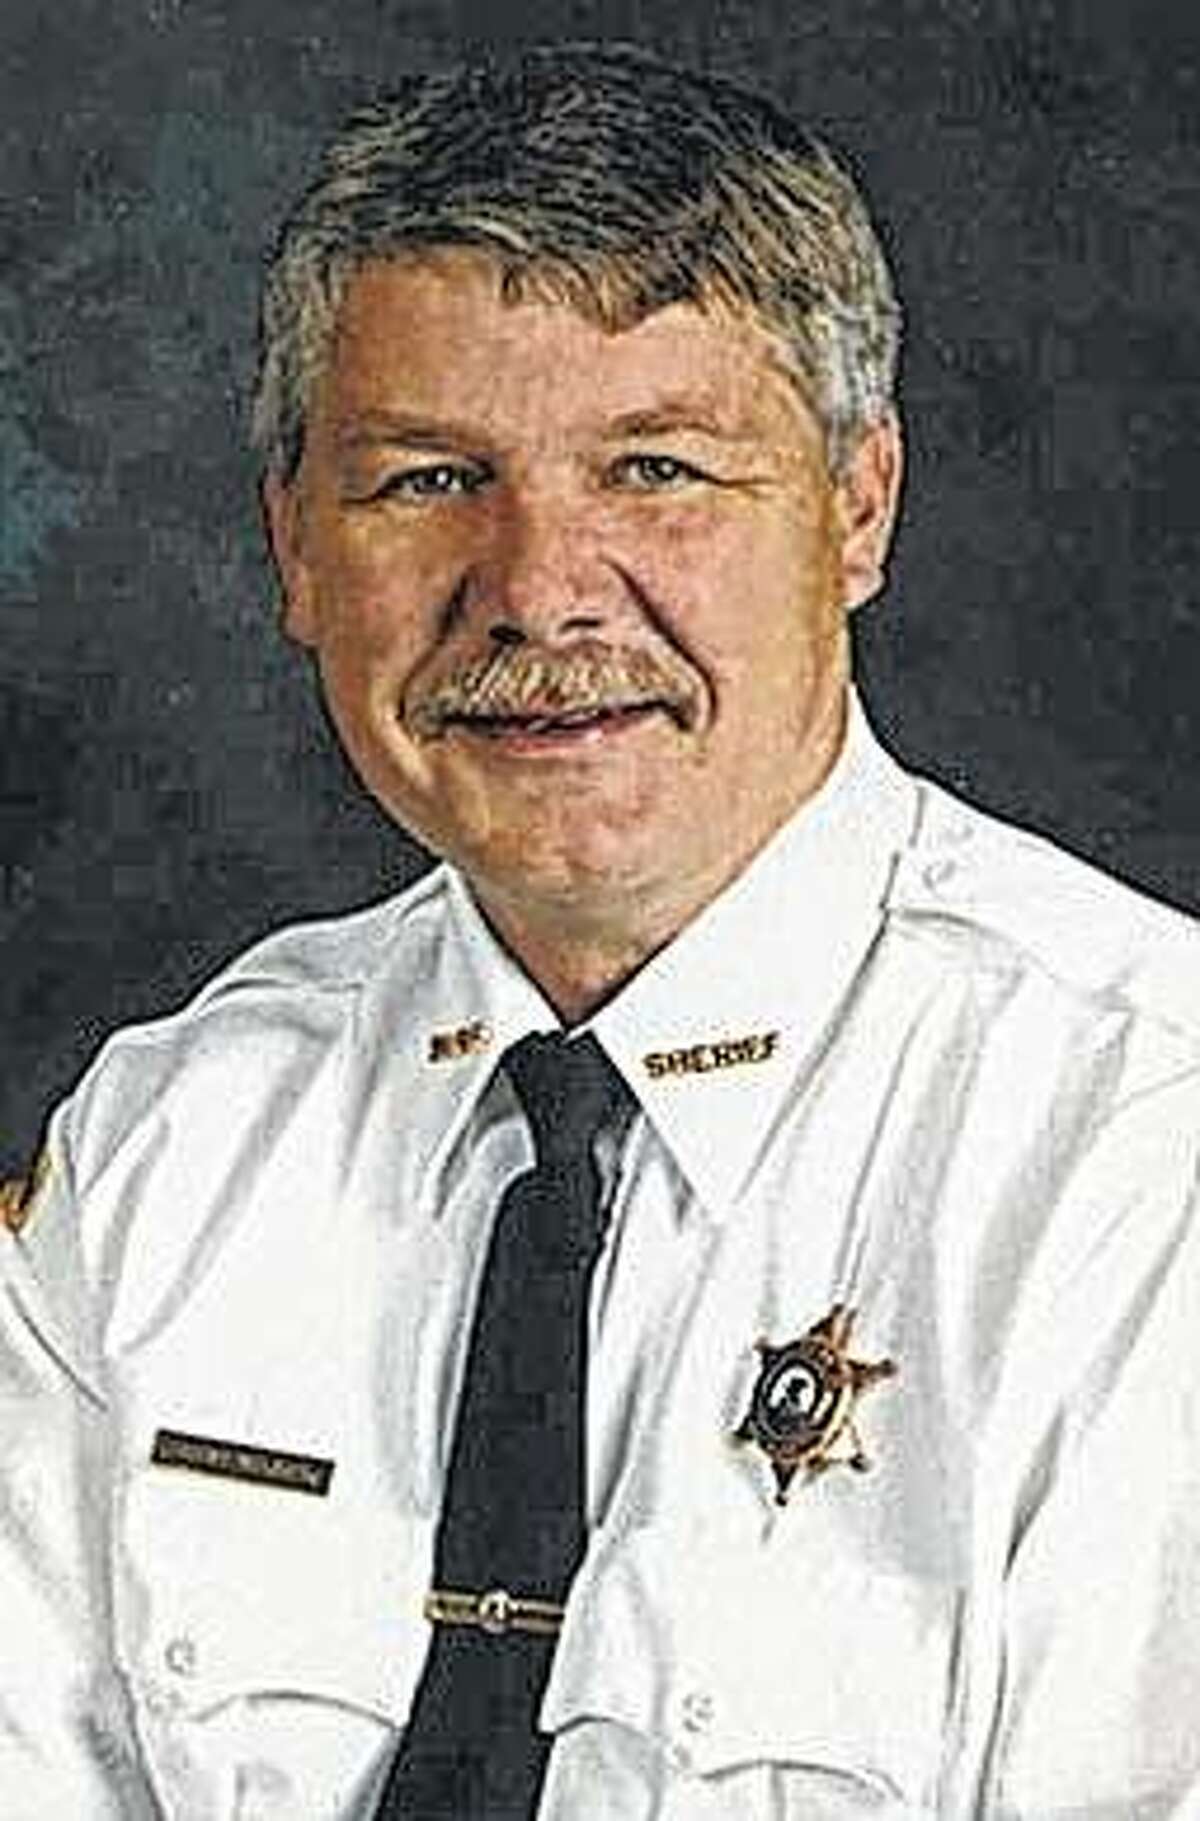 Friday will be Randy Duvendack’s last day as Morgan County sheriff.